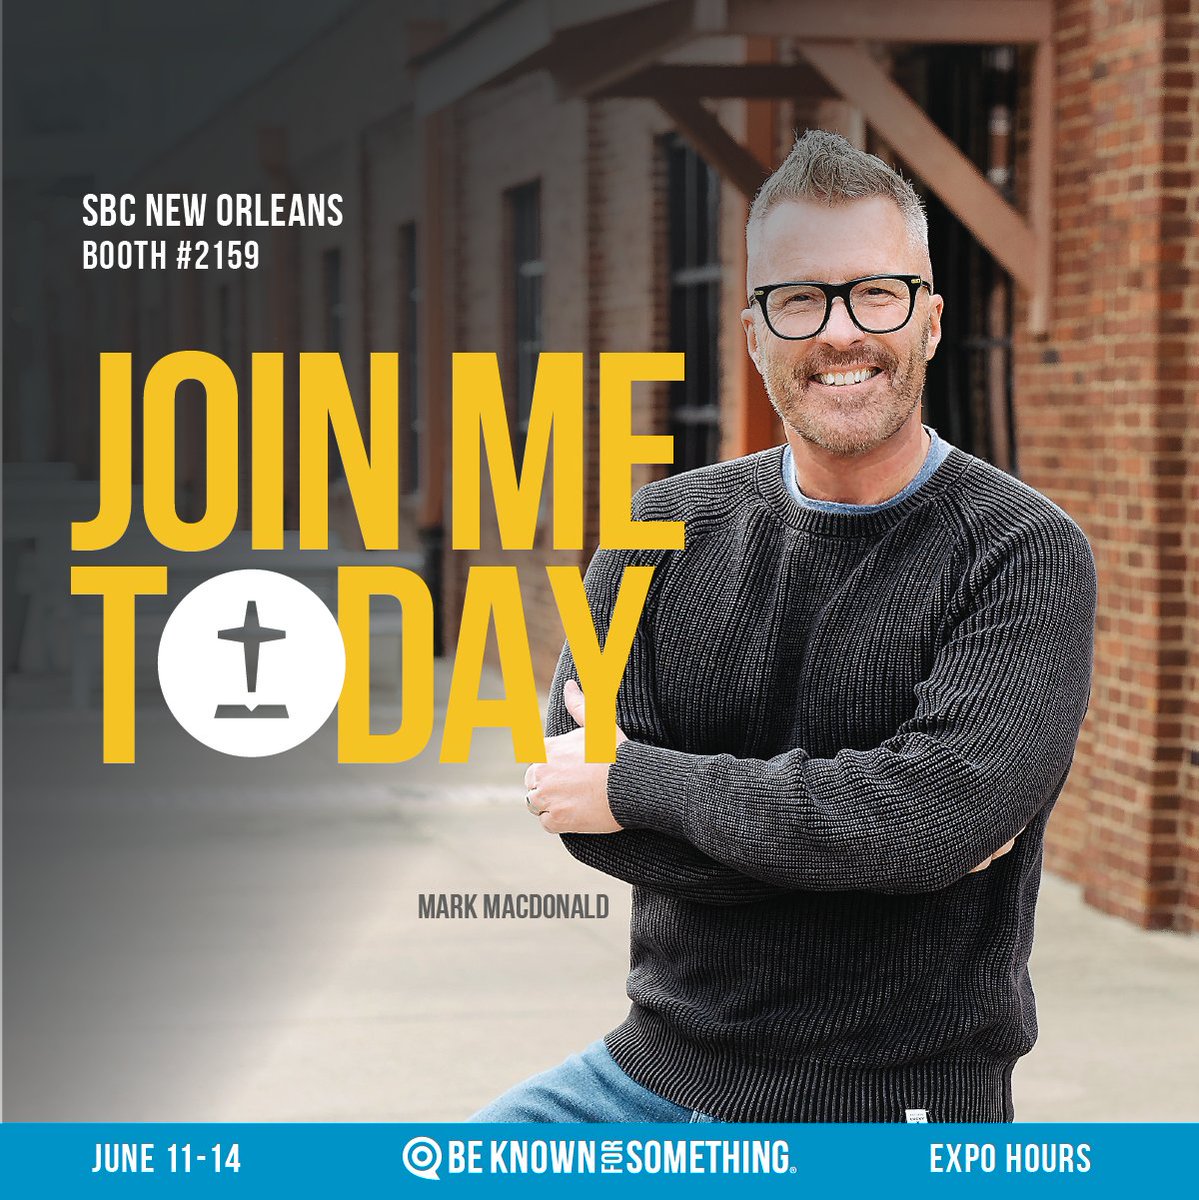 Join Mark at the SBC Annual Meeting, Booth #2159. Author of the bestselling Church Branding book. Ask him anything! #Branding, #websites, #socialmedia, #SEO 
June 11-14, Expo Hours
#beknownforsomething #discoveryourthread #churchcomms #branding #pastor #annualmeeting #sbc23